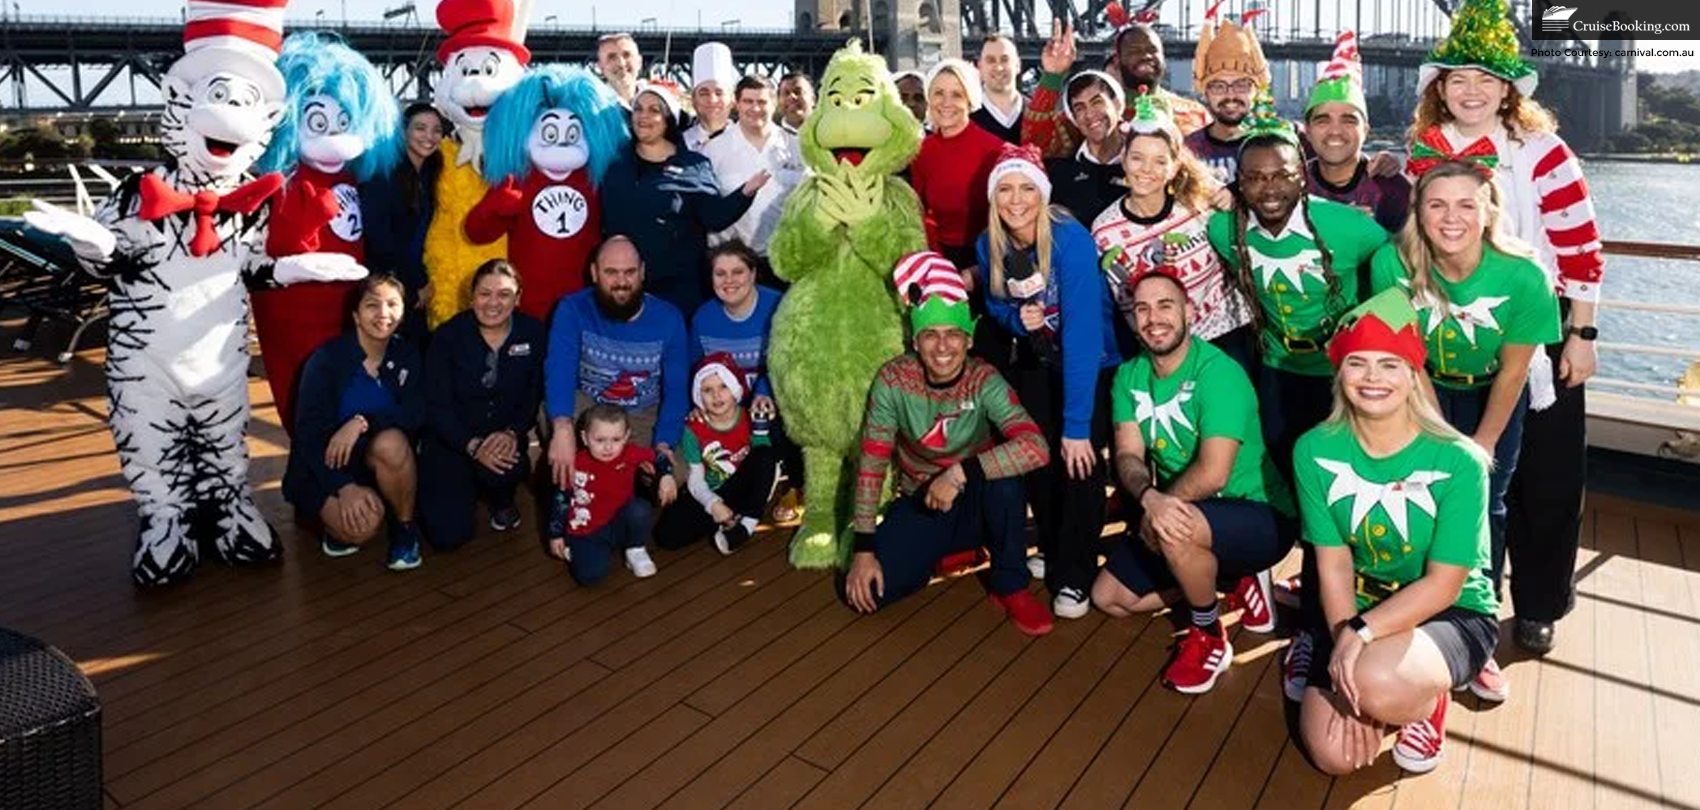 Carnival Cruise Line Reveals Offerings for ‘Grinchmas in July’